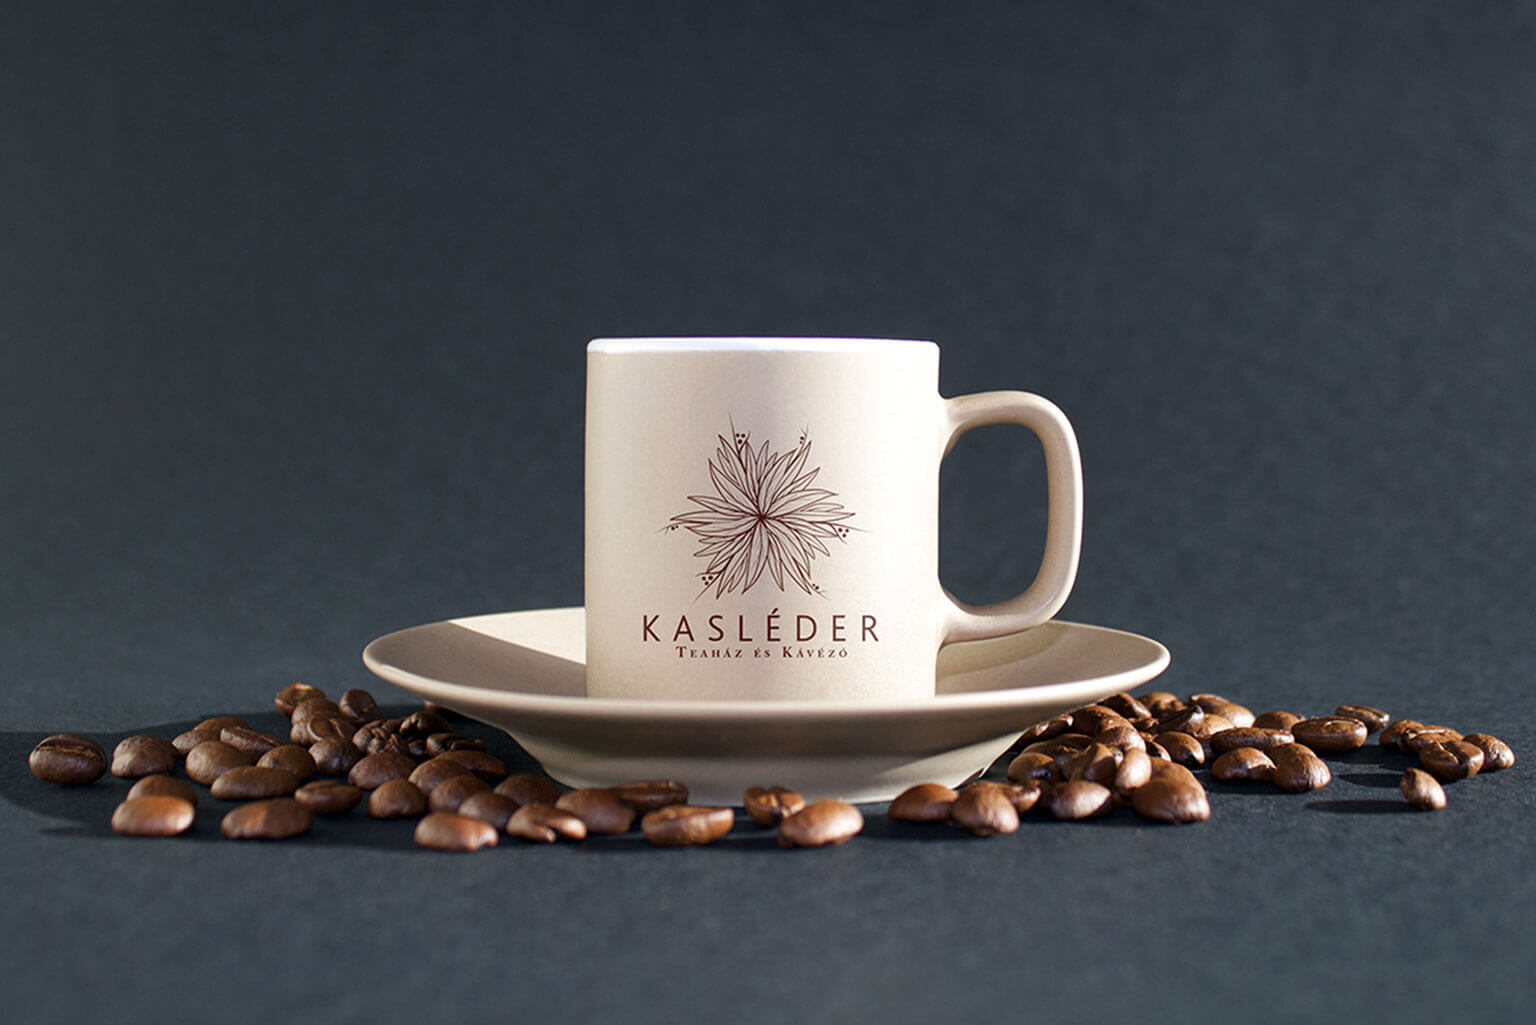 The Kasléder coffee and tea shop brand should reflect the devotion to the tea, the culture of the tea, homemade goodies and the healthy naturalistic lifestyle